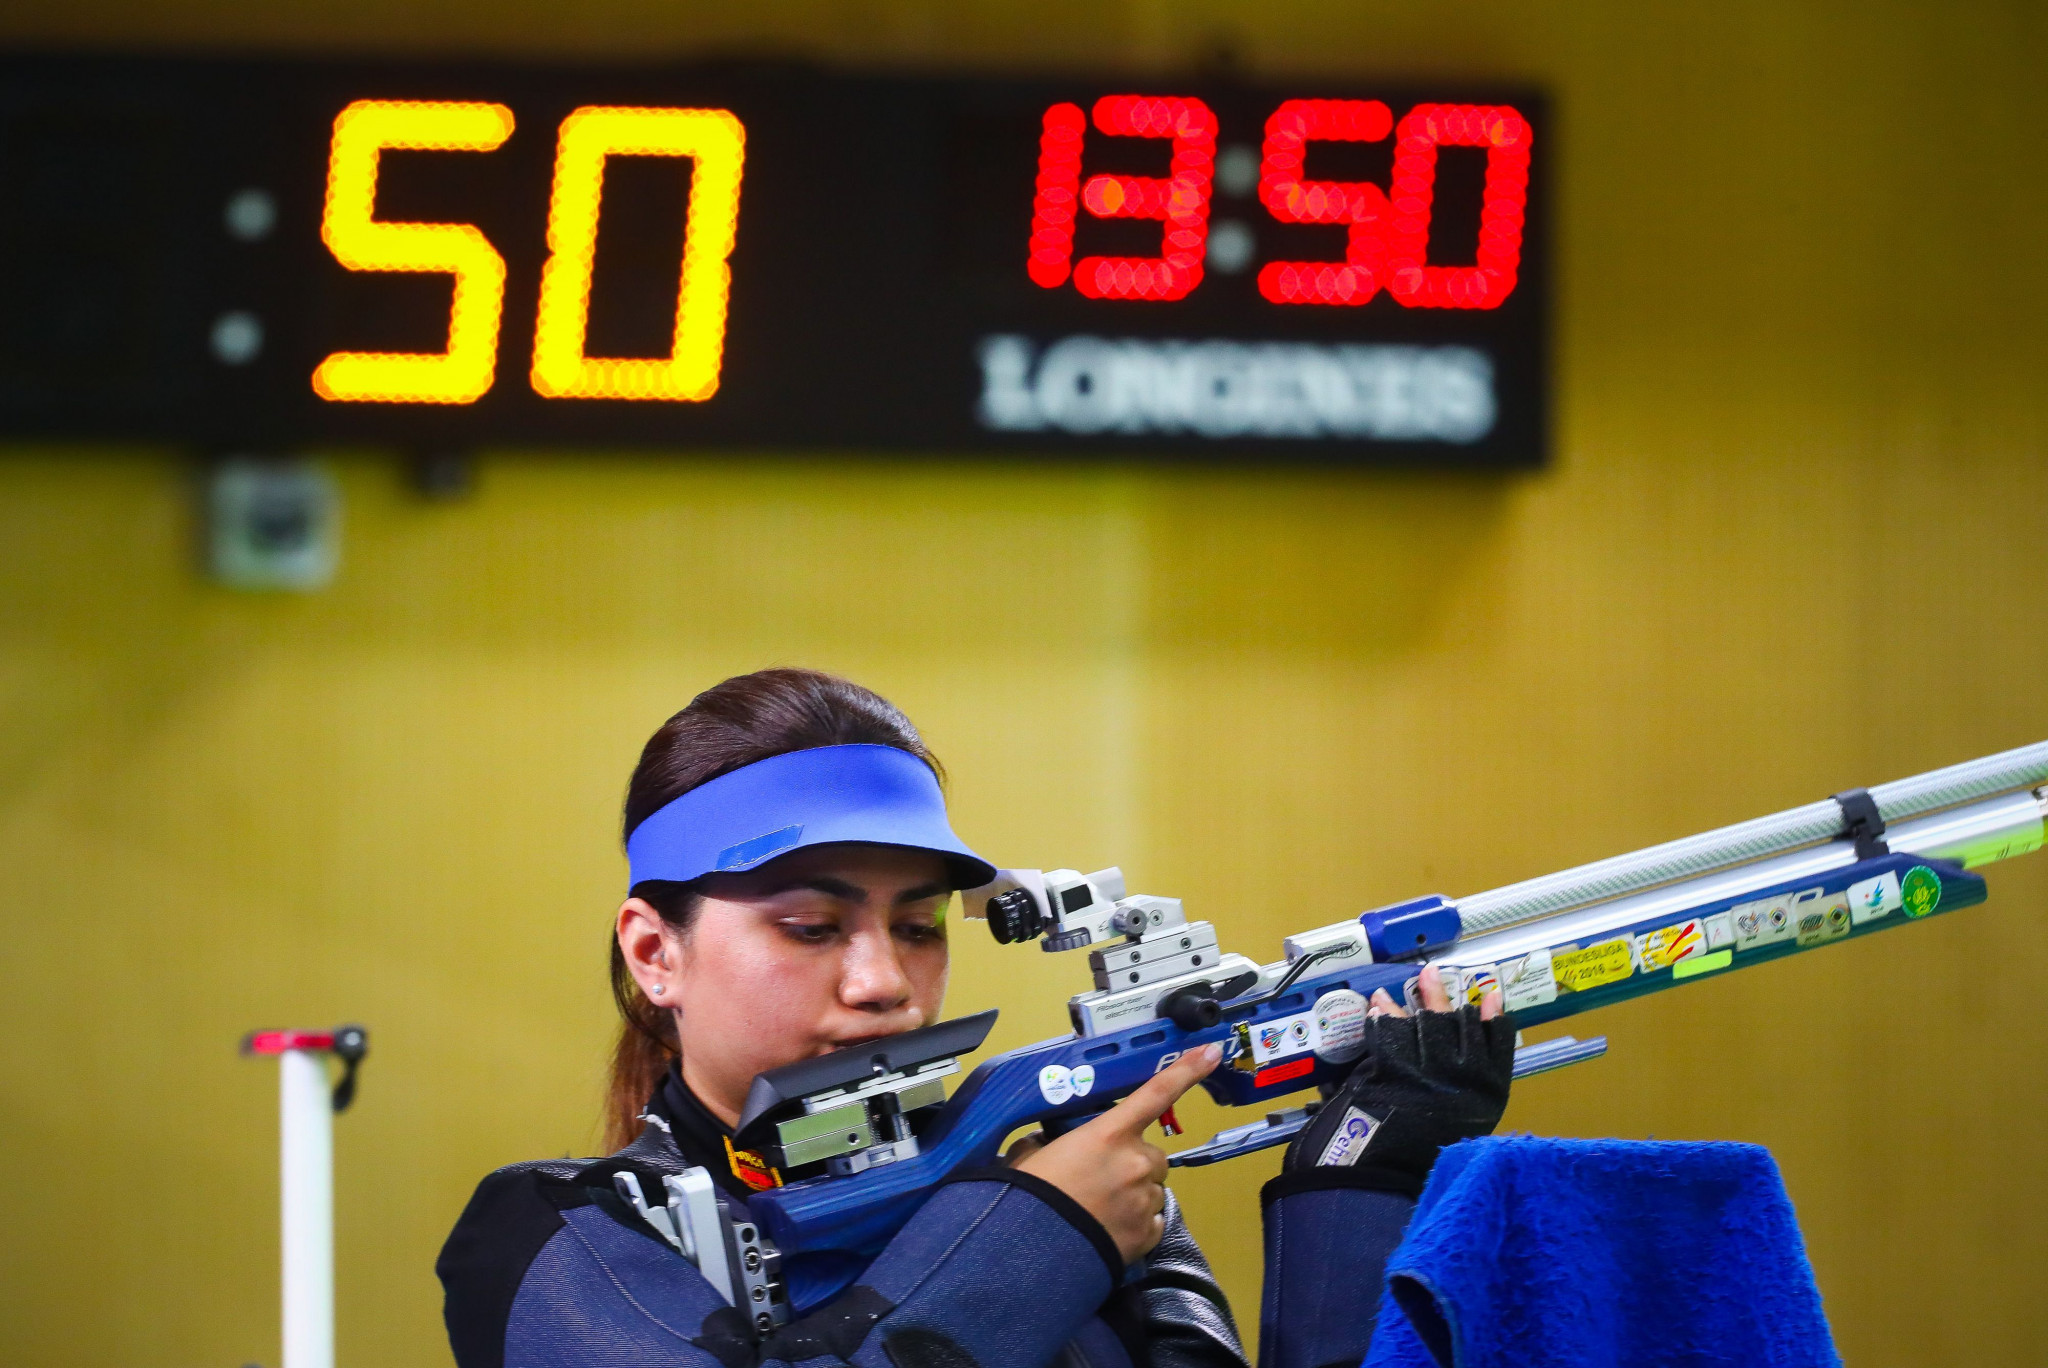 India's Apurvi Chandela triumphed in the women's 10m air rifle event at the ISSF Rifle and Pistol World Cup ©Getty Images